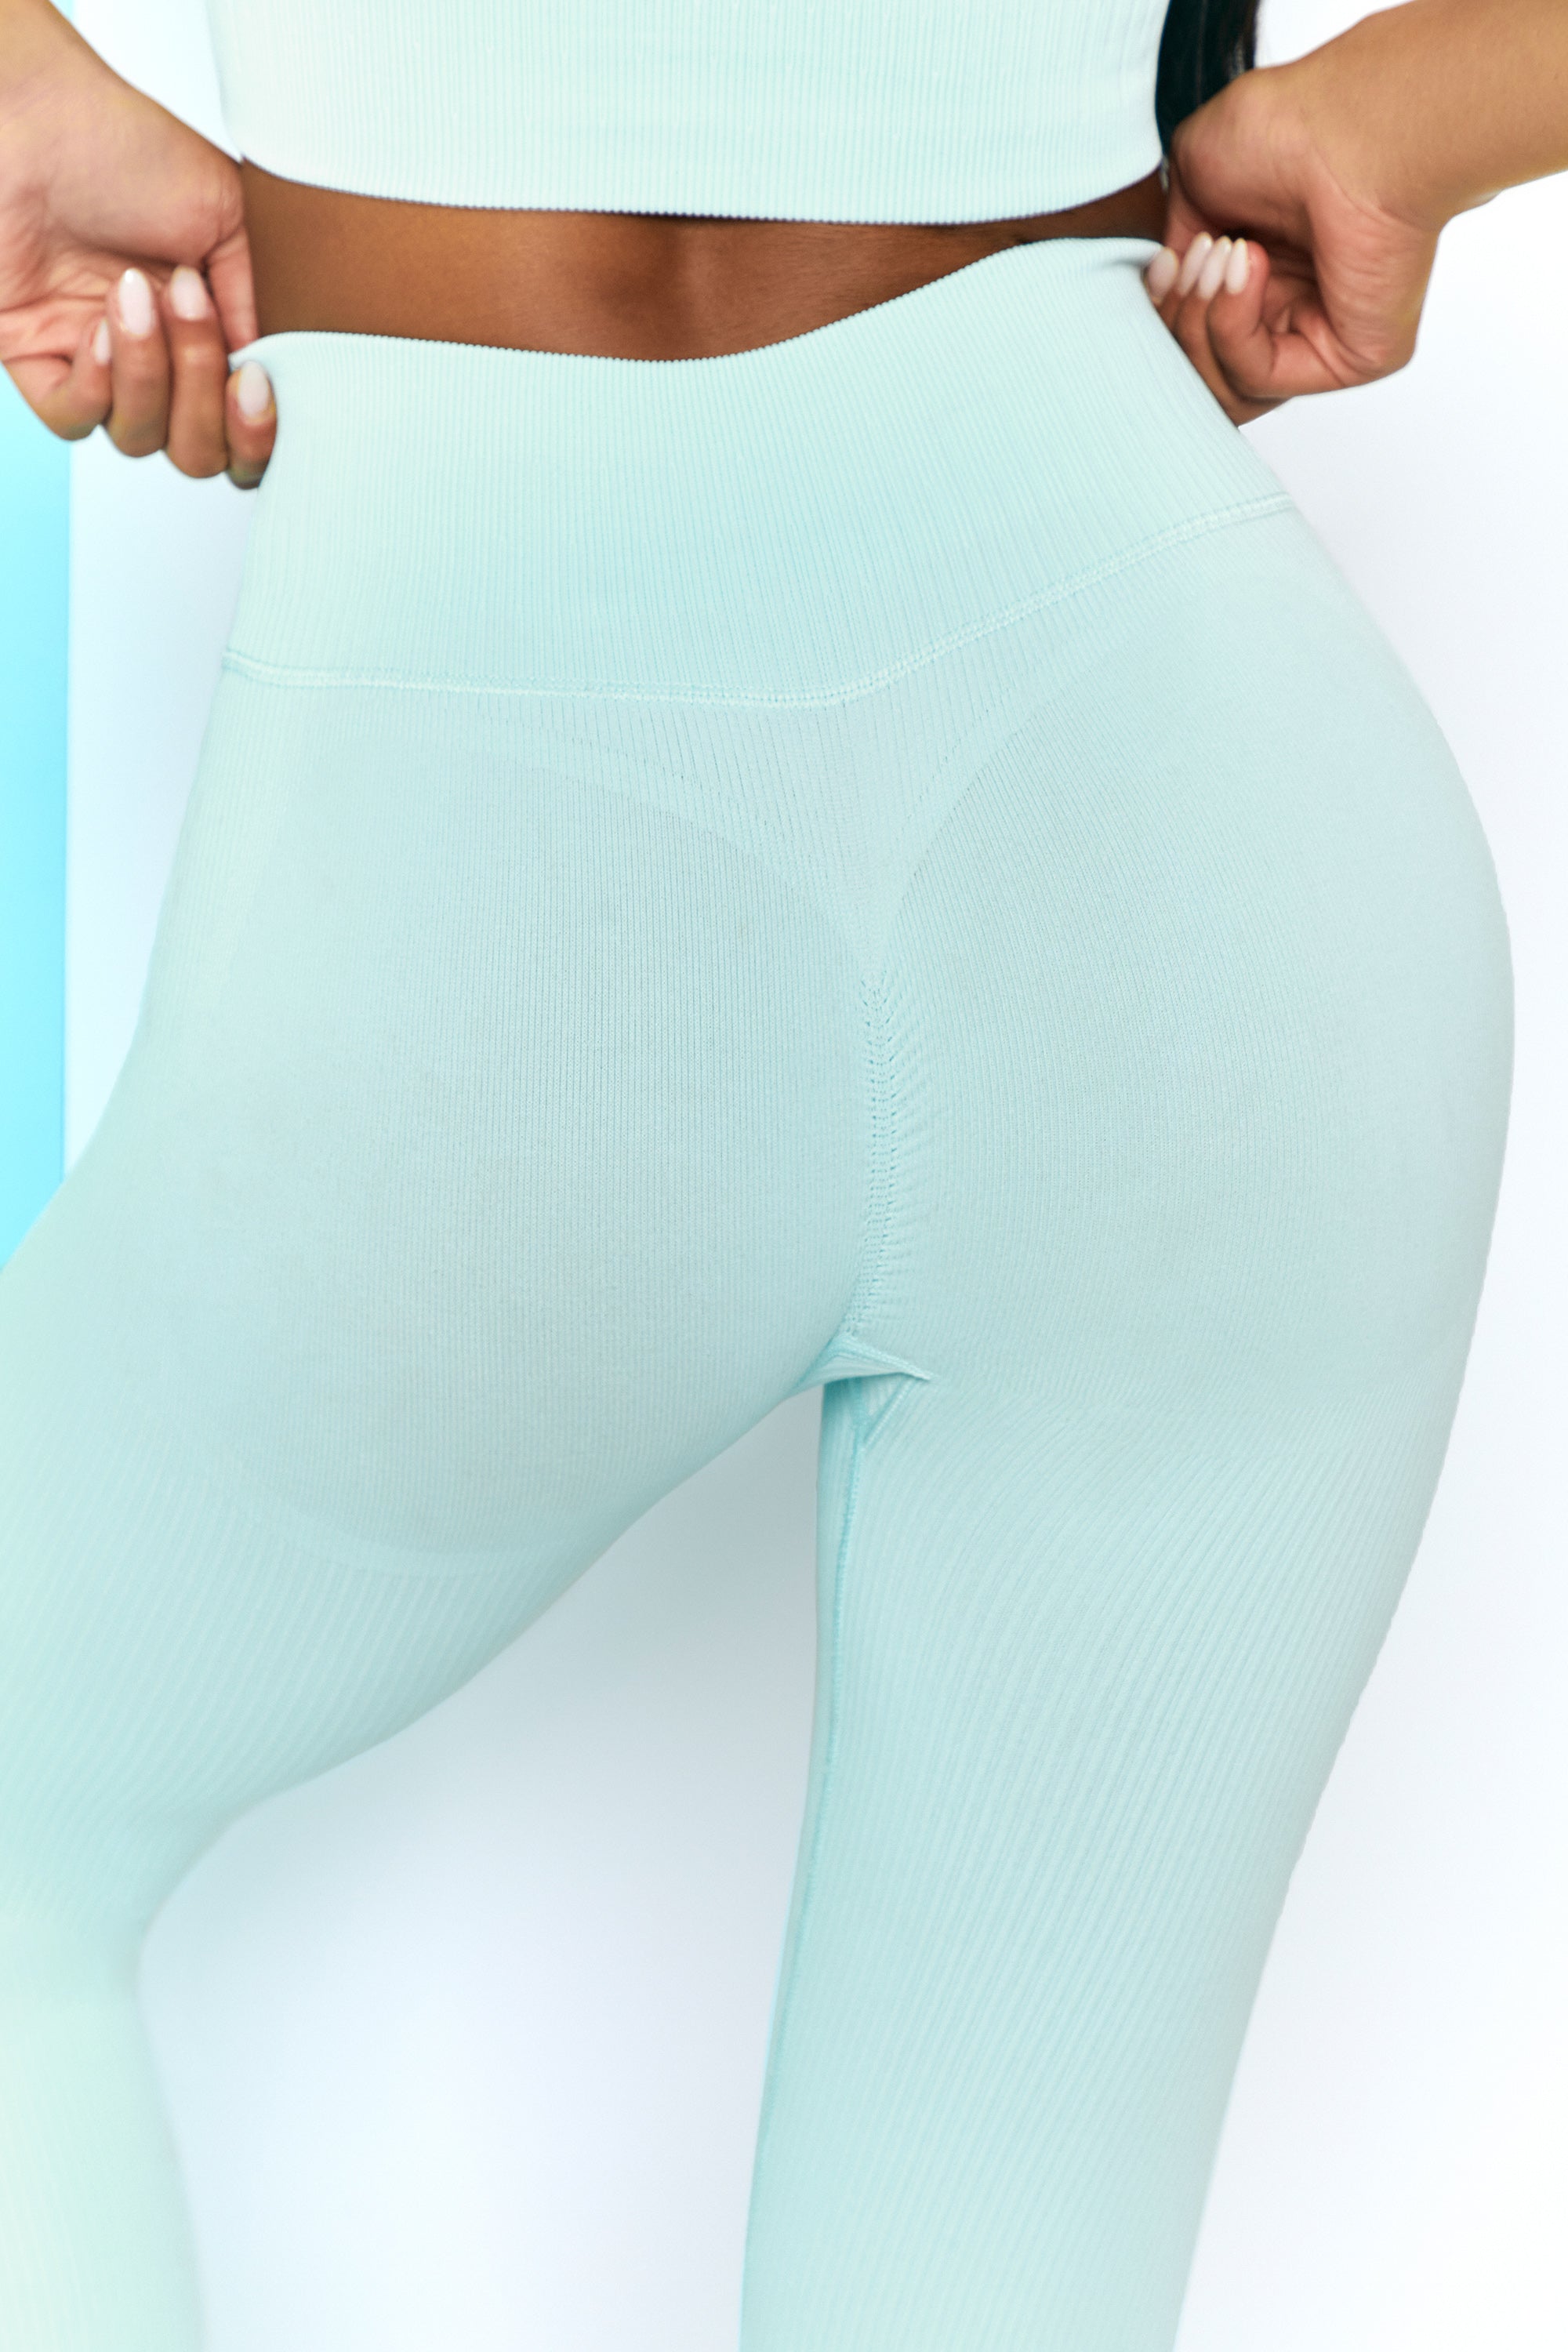 Royal to light blue ombre exercise capri length leggings. Made of 65%  nylon, 30% polyester and 5% Spandex. Sold in packs of six - two smalls, two  mediums, two larges., 732479